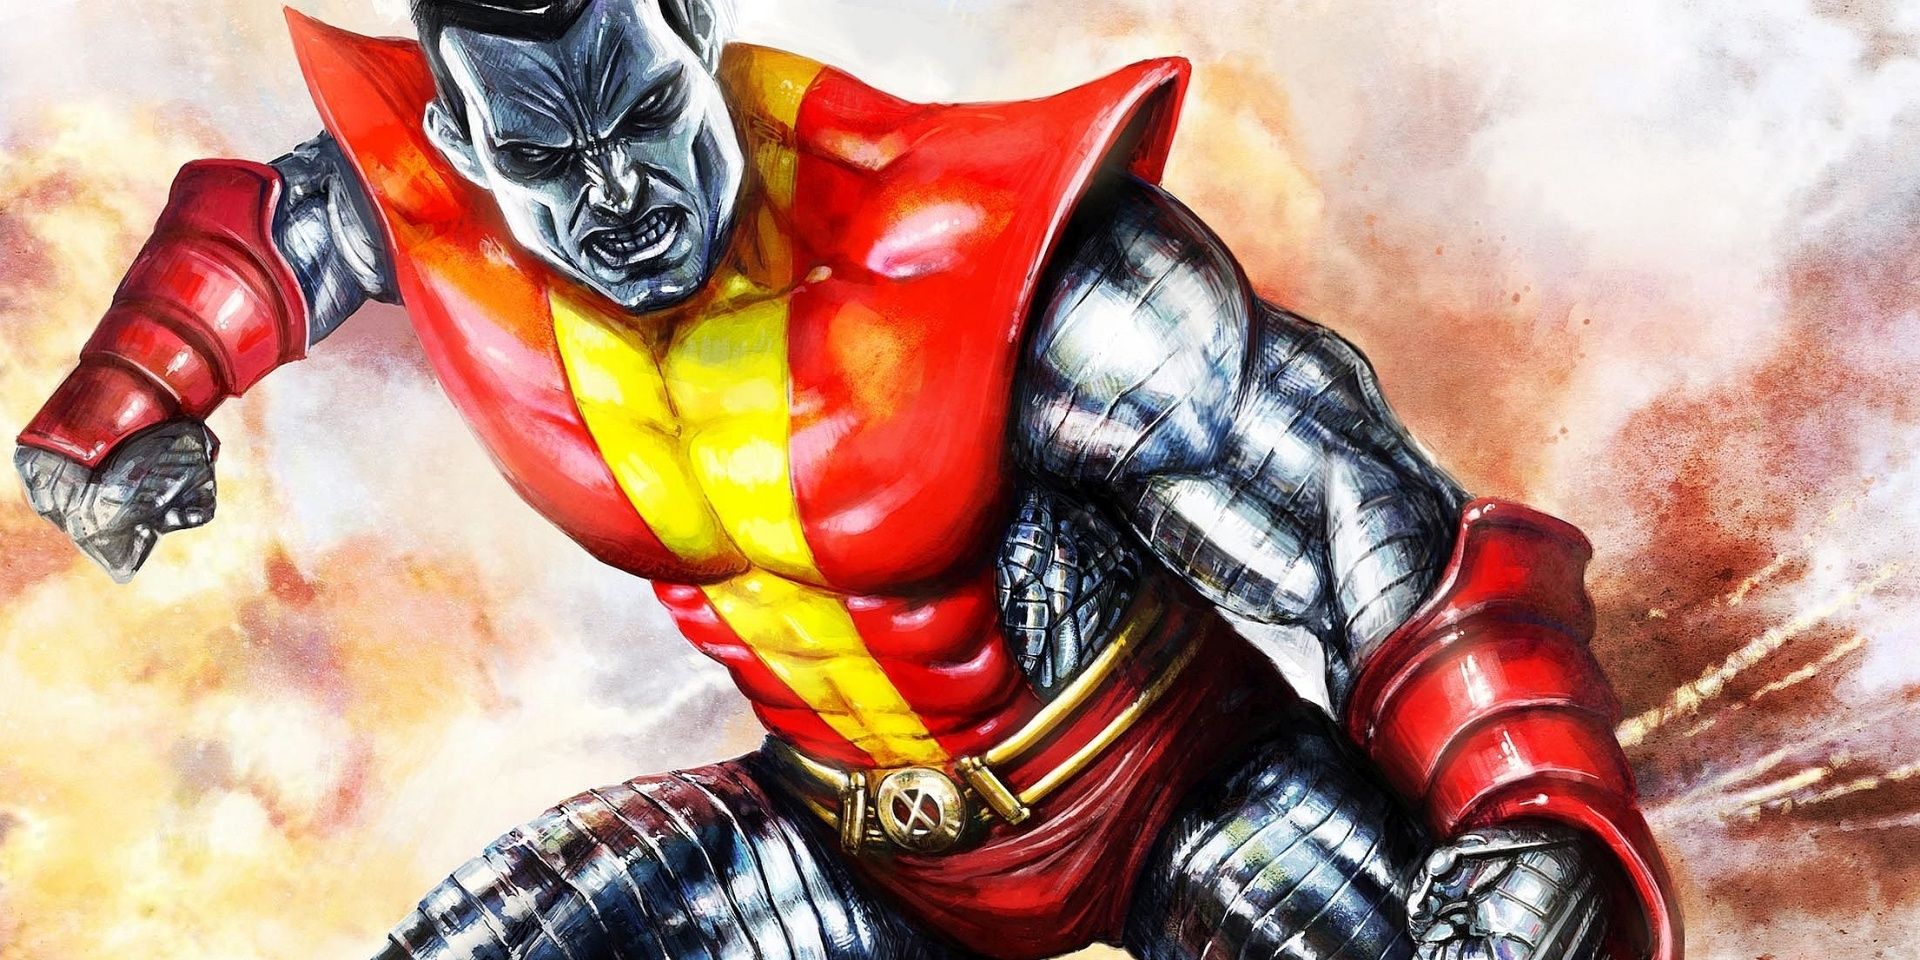 Colossus in his armored form as a member of the X-Men.